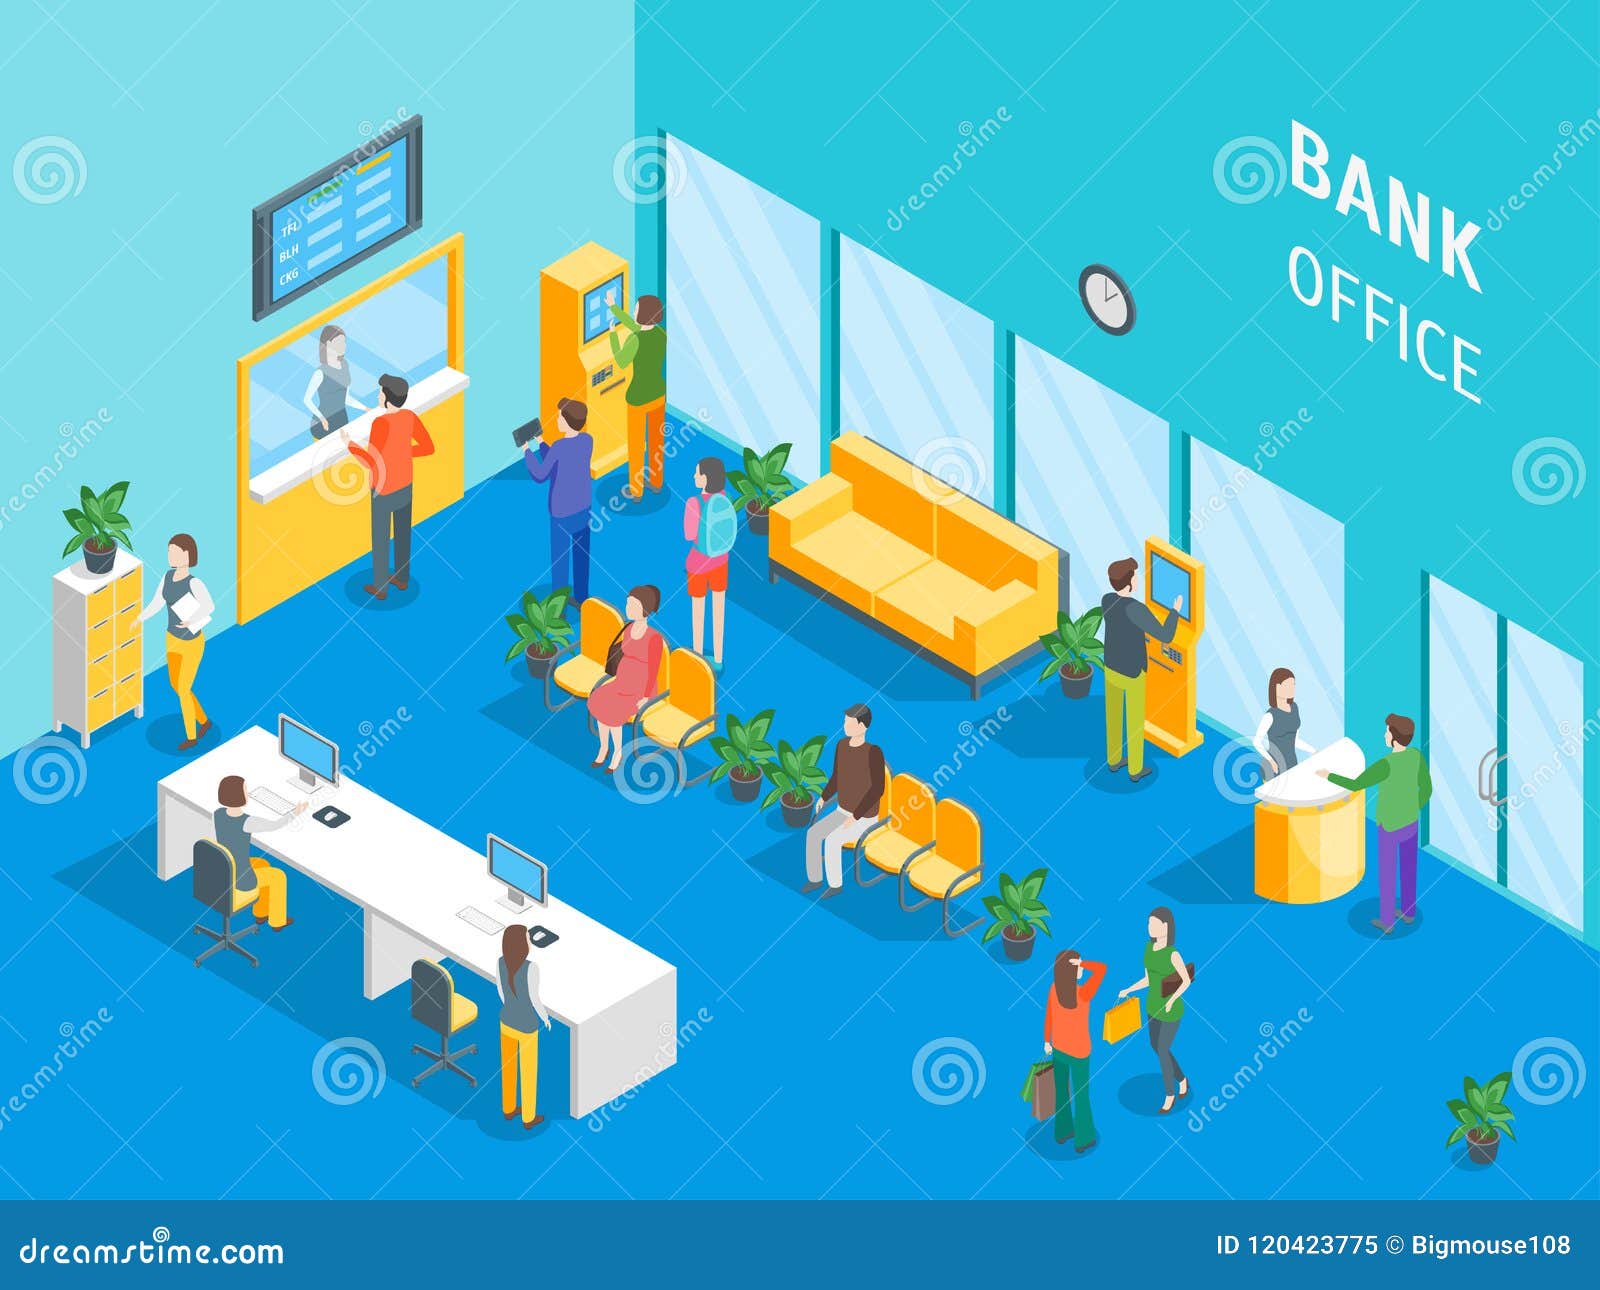 Bank Office Interior with Furniture and People Isometric View